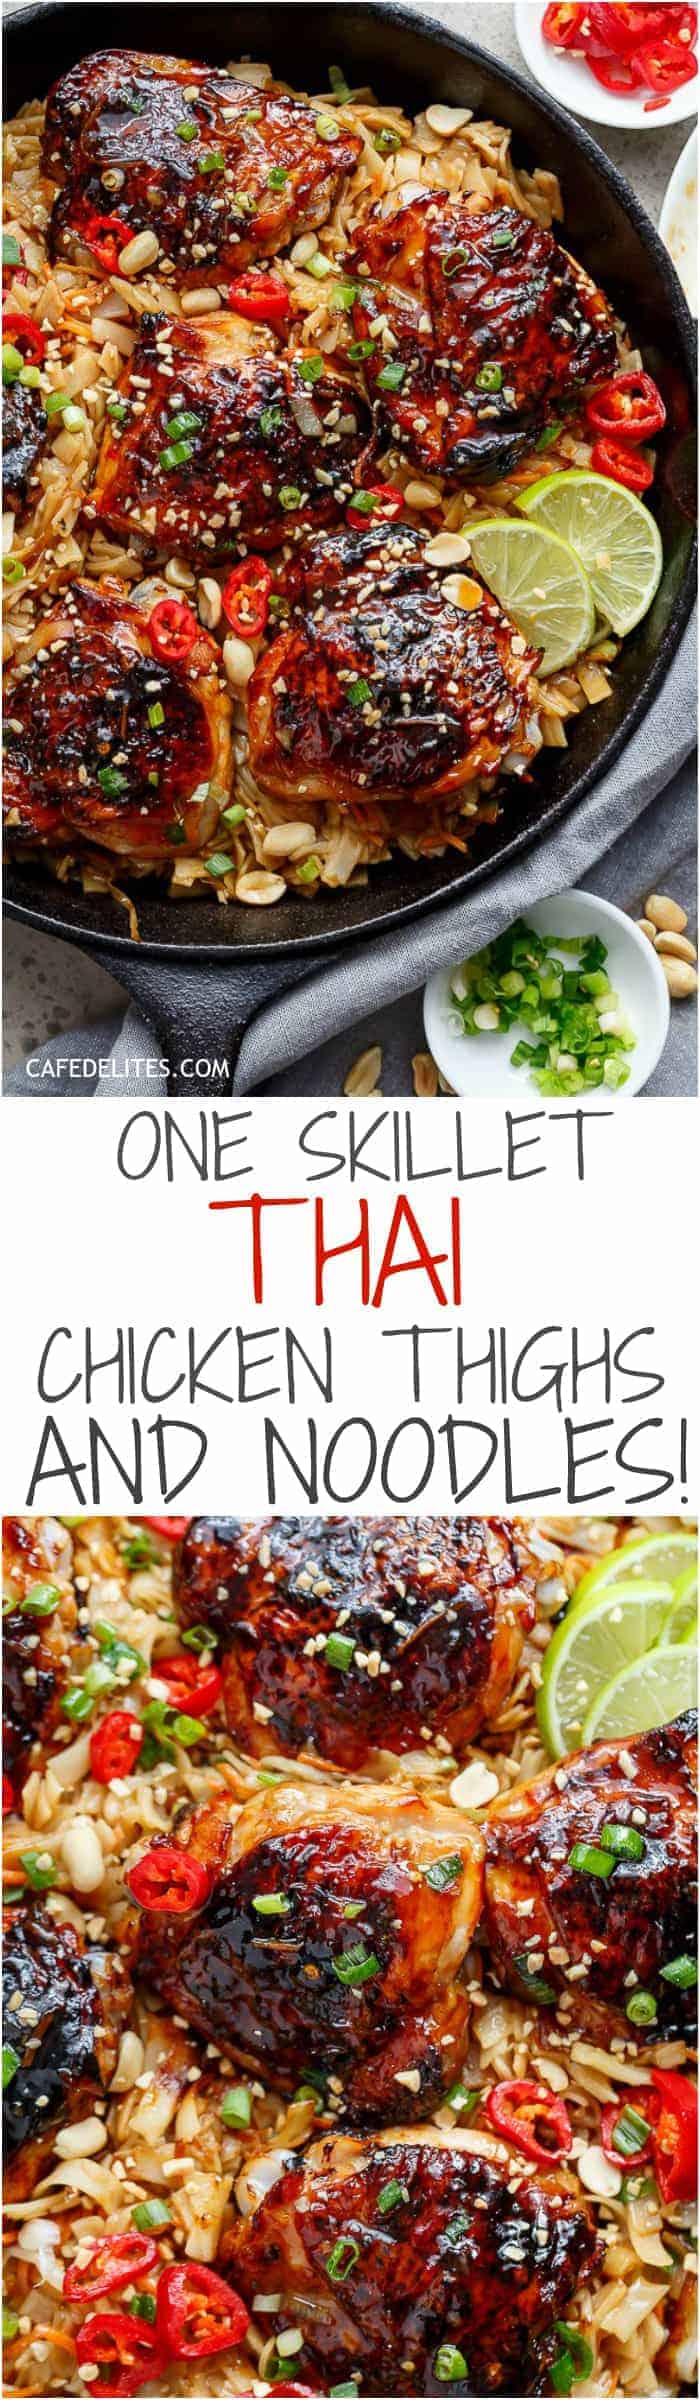 One Skillet Thai Chicken Thighs + Noodles! A sticky, Thai inspired chicken recipe served with Thai Rice noodles, cooked in one skillet! | https://cafedelites.com